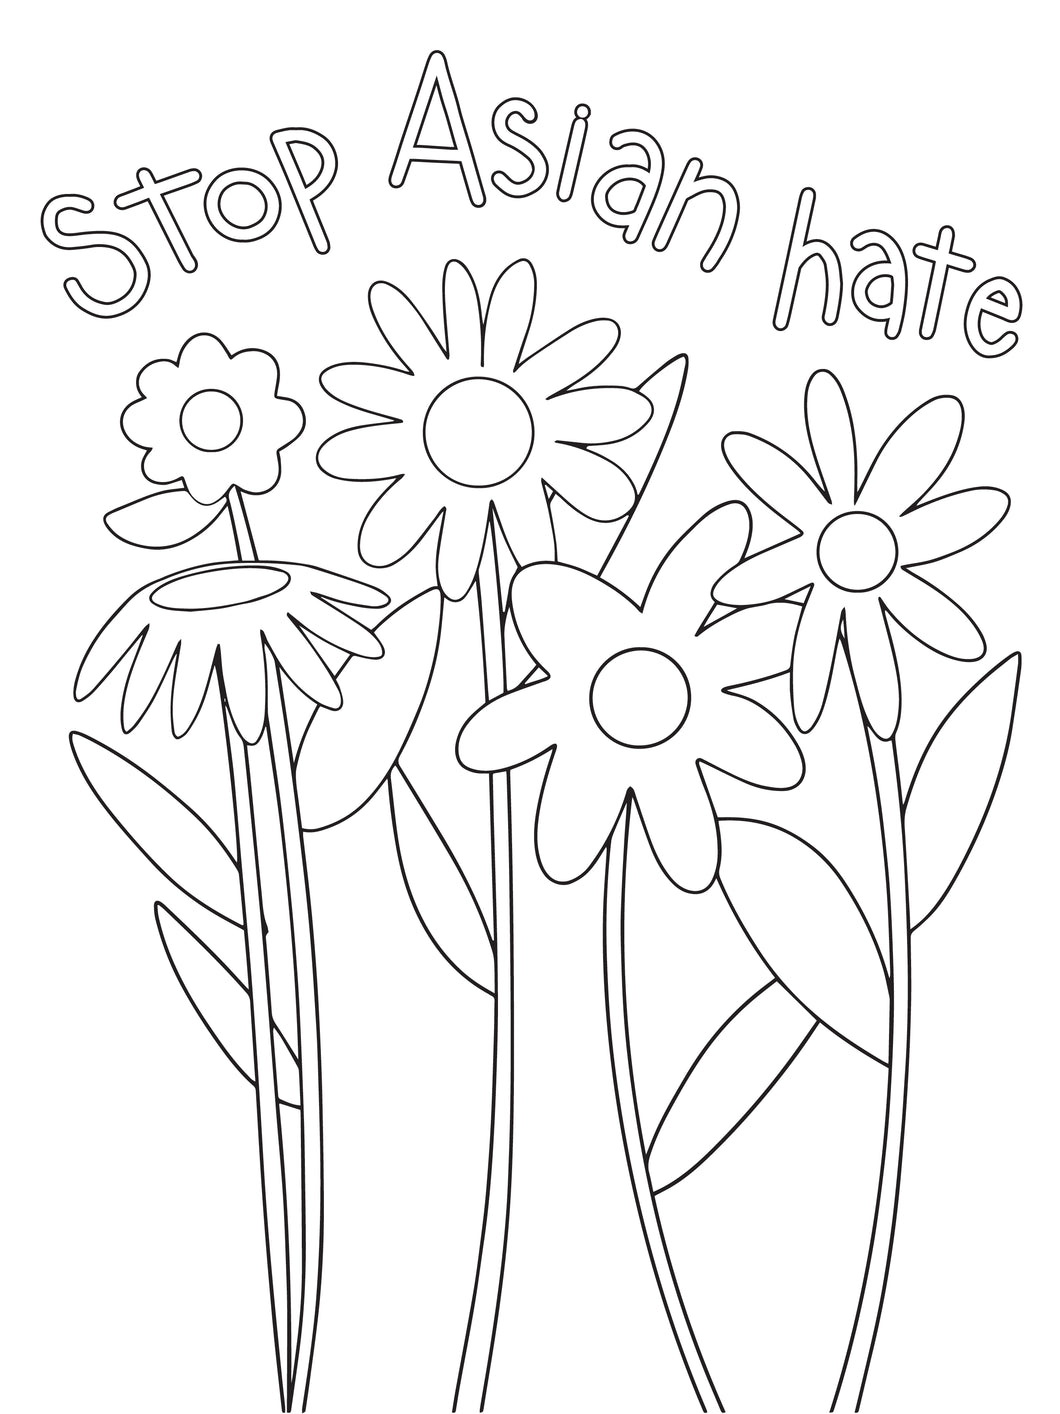 STOP ASIAN HATE COLORING PAGE | INSTANT DOWNLOAD